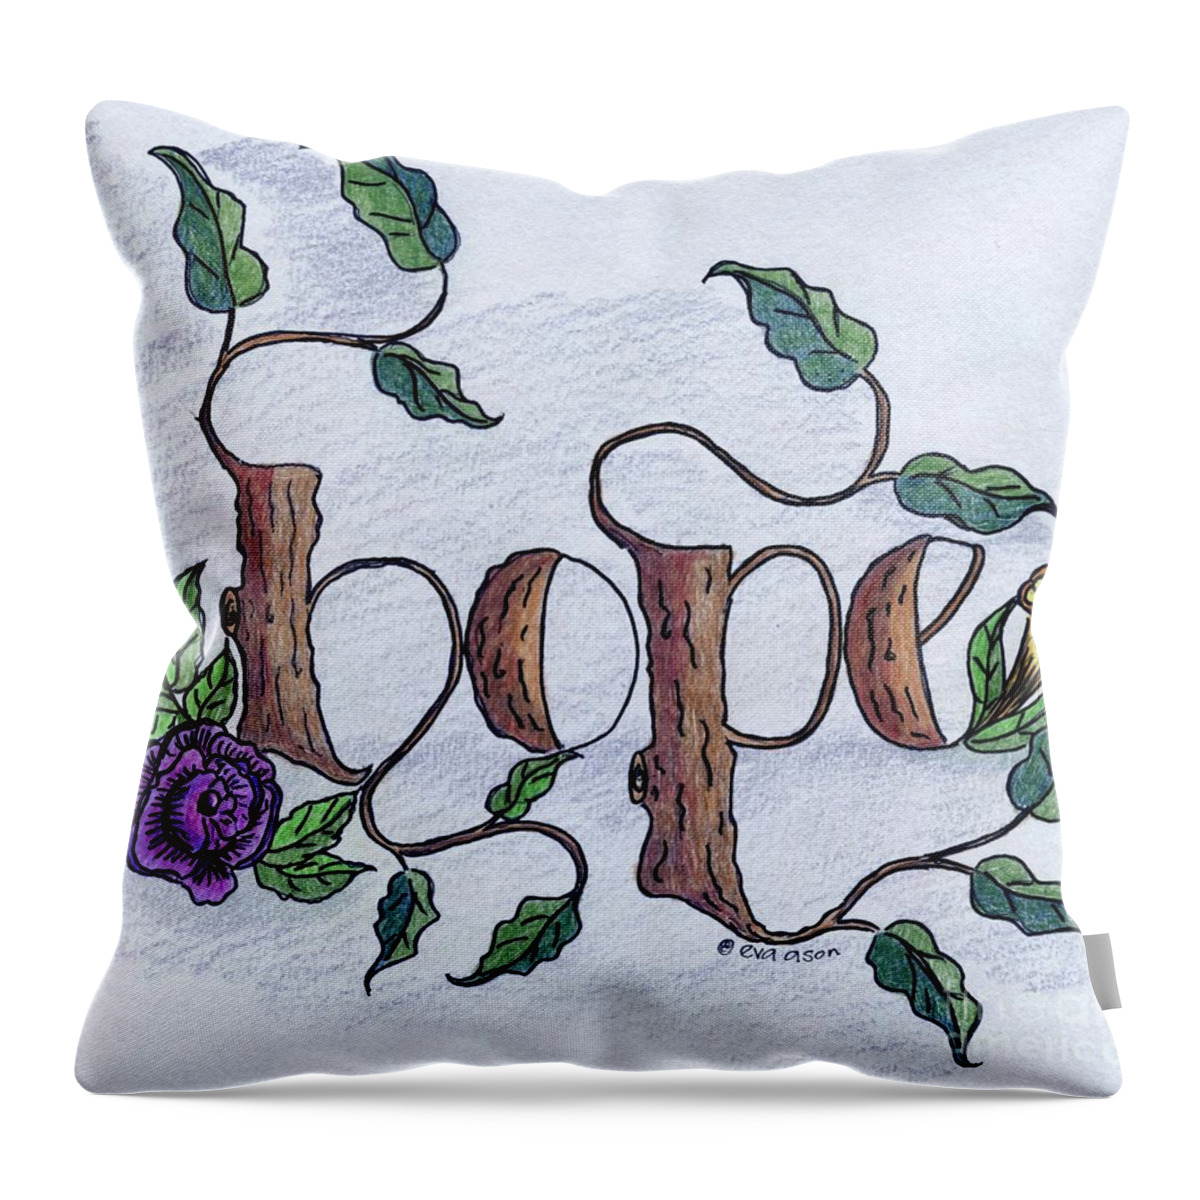 Hope Throw Pillow featuring the drawing Hope by Eva Ason